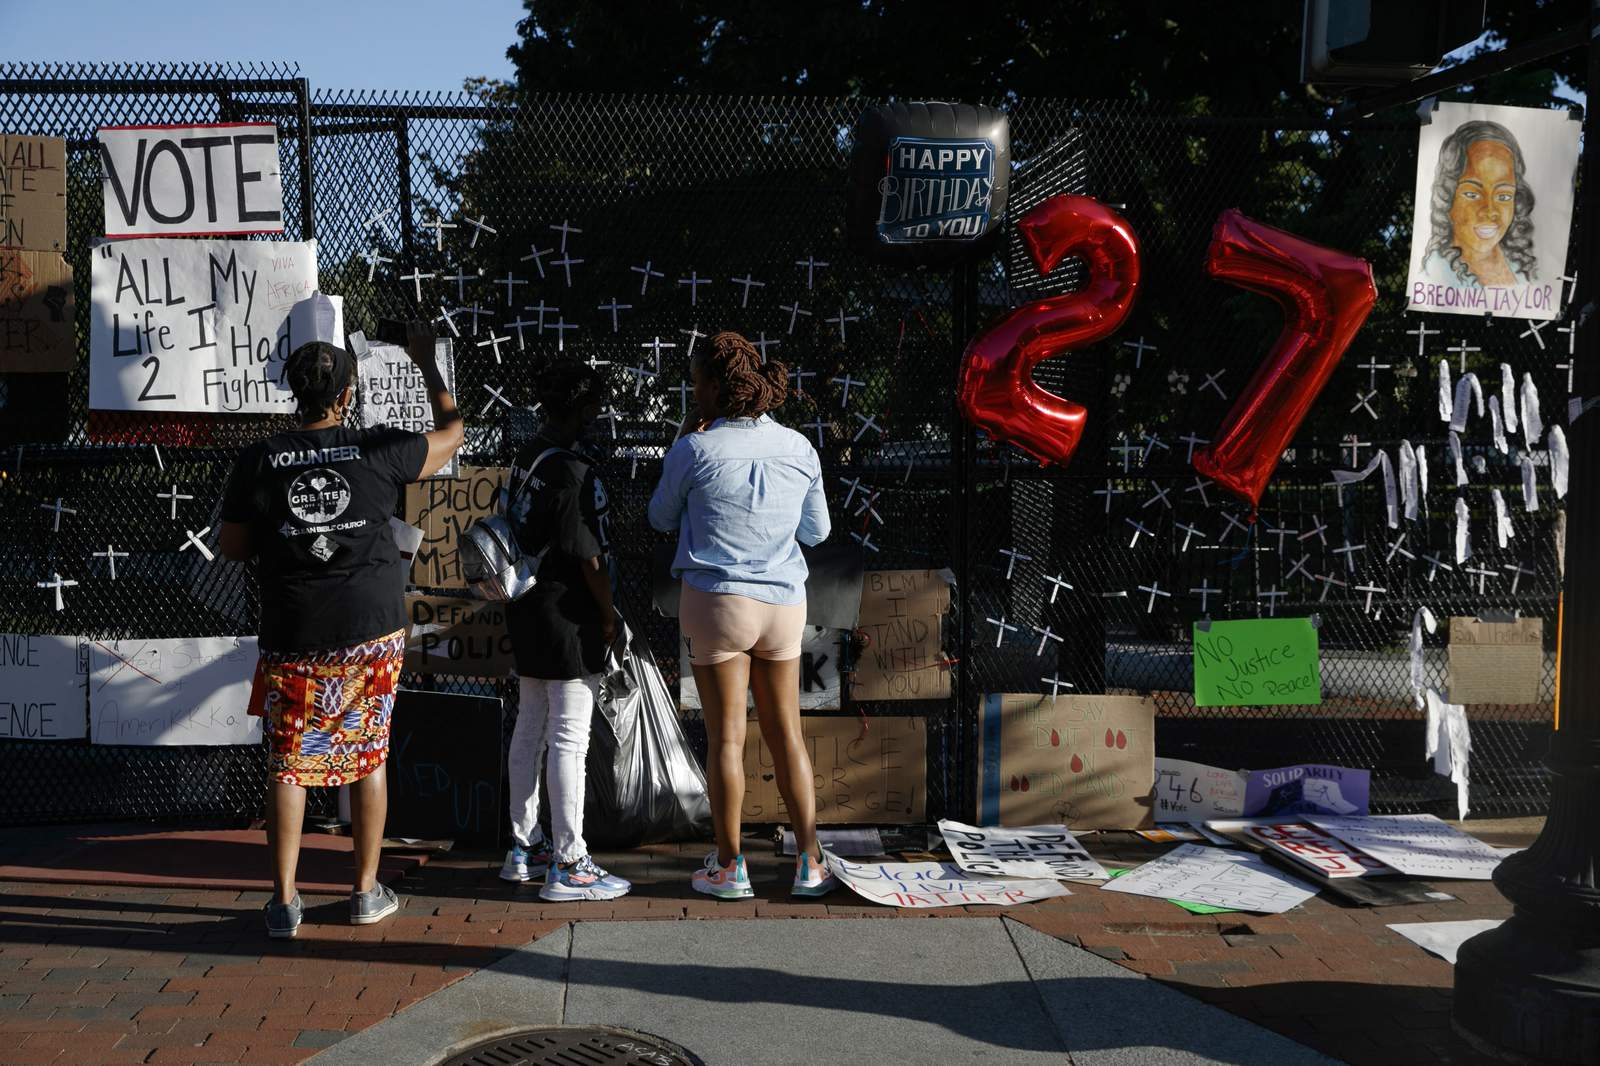 Violence gives way to street fair vibe outside White House